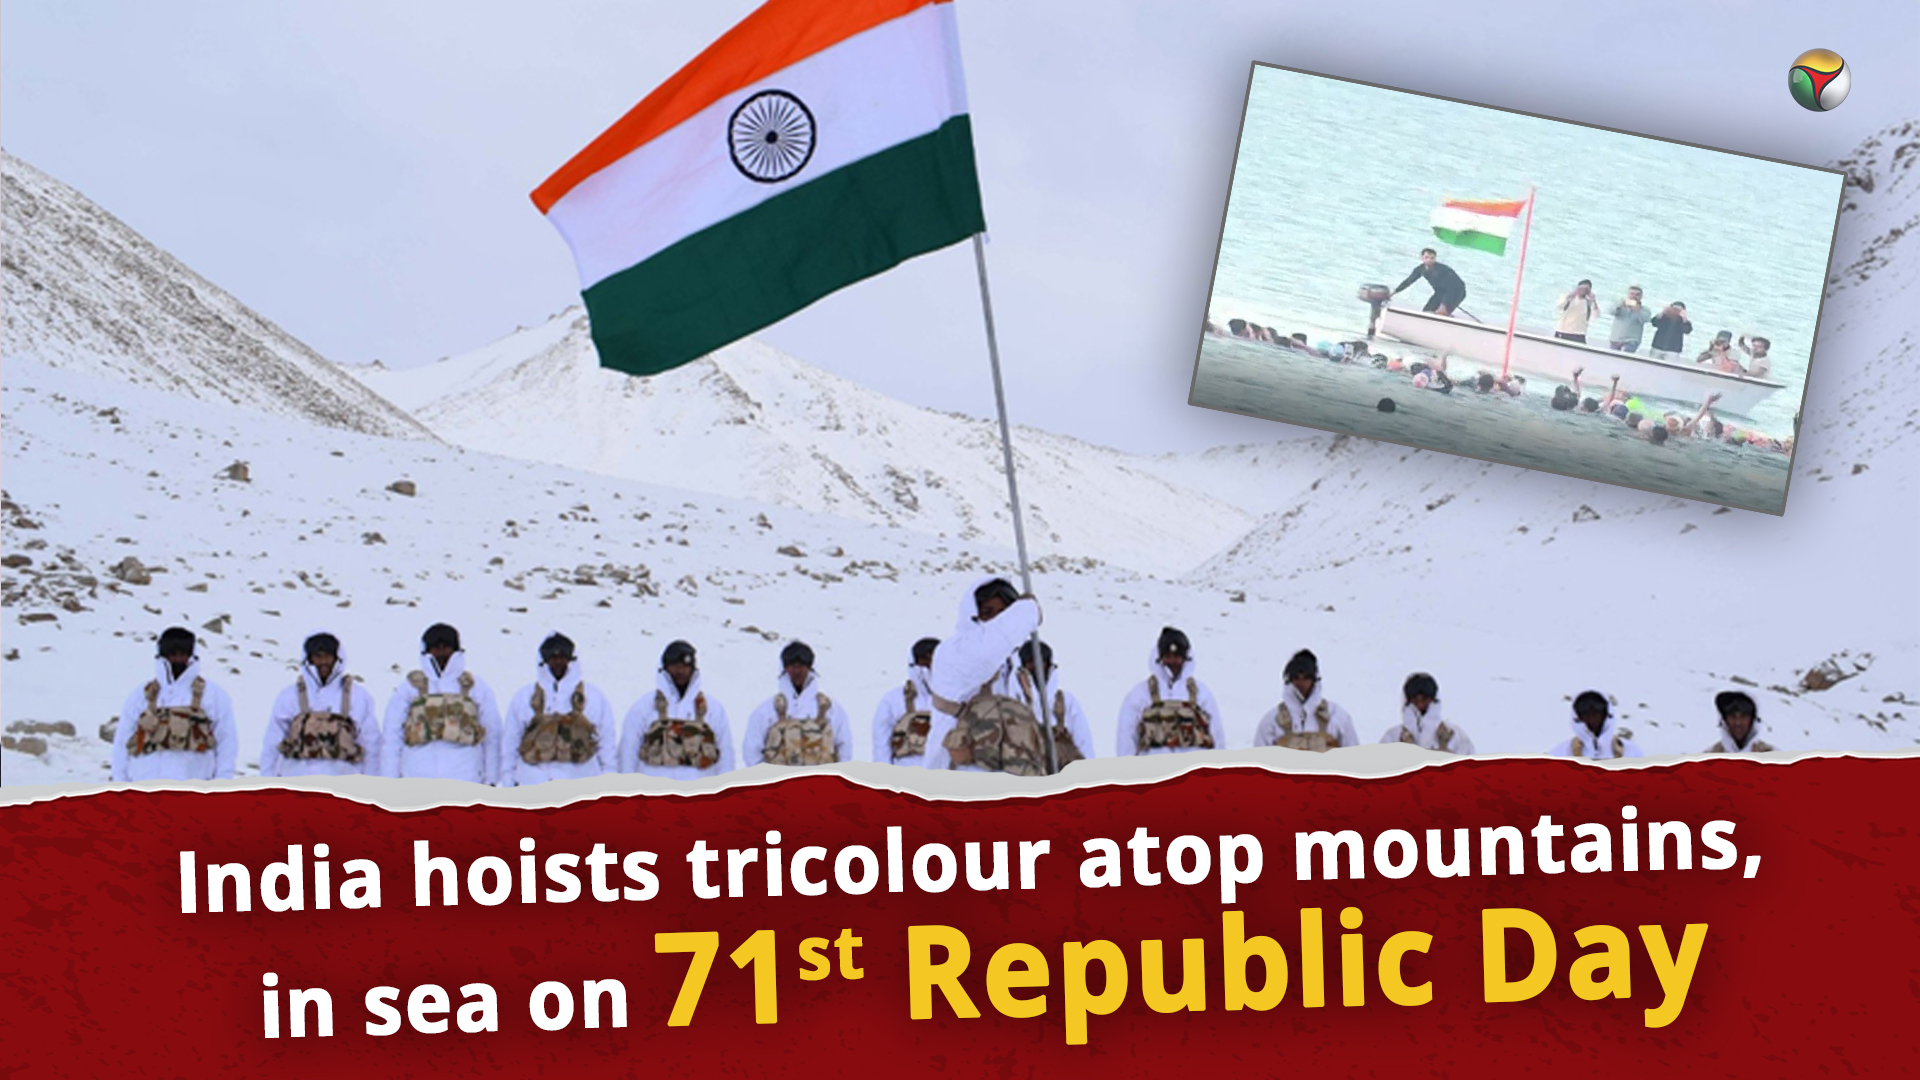 India hoists tricolour atop mountains, in sea on 71st Republic Day